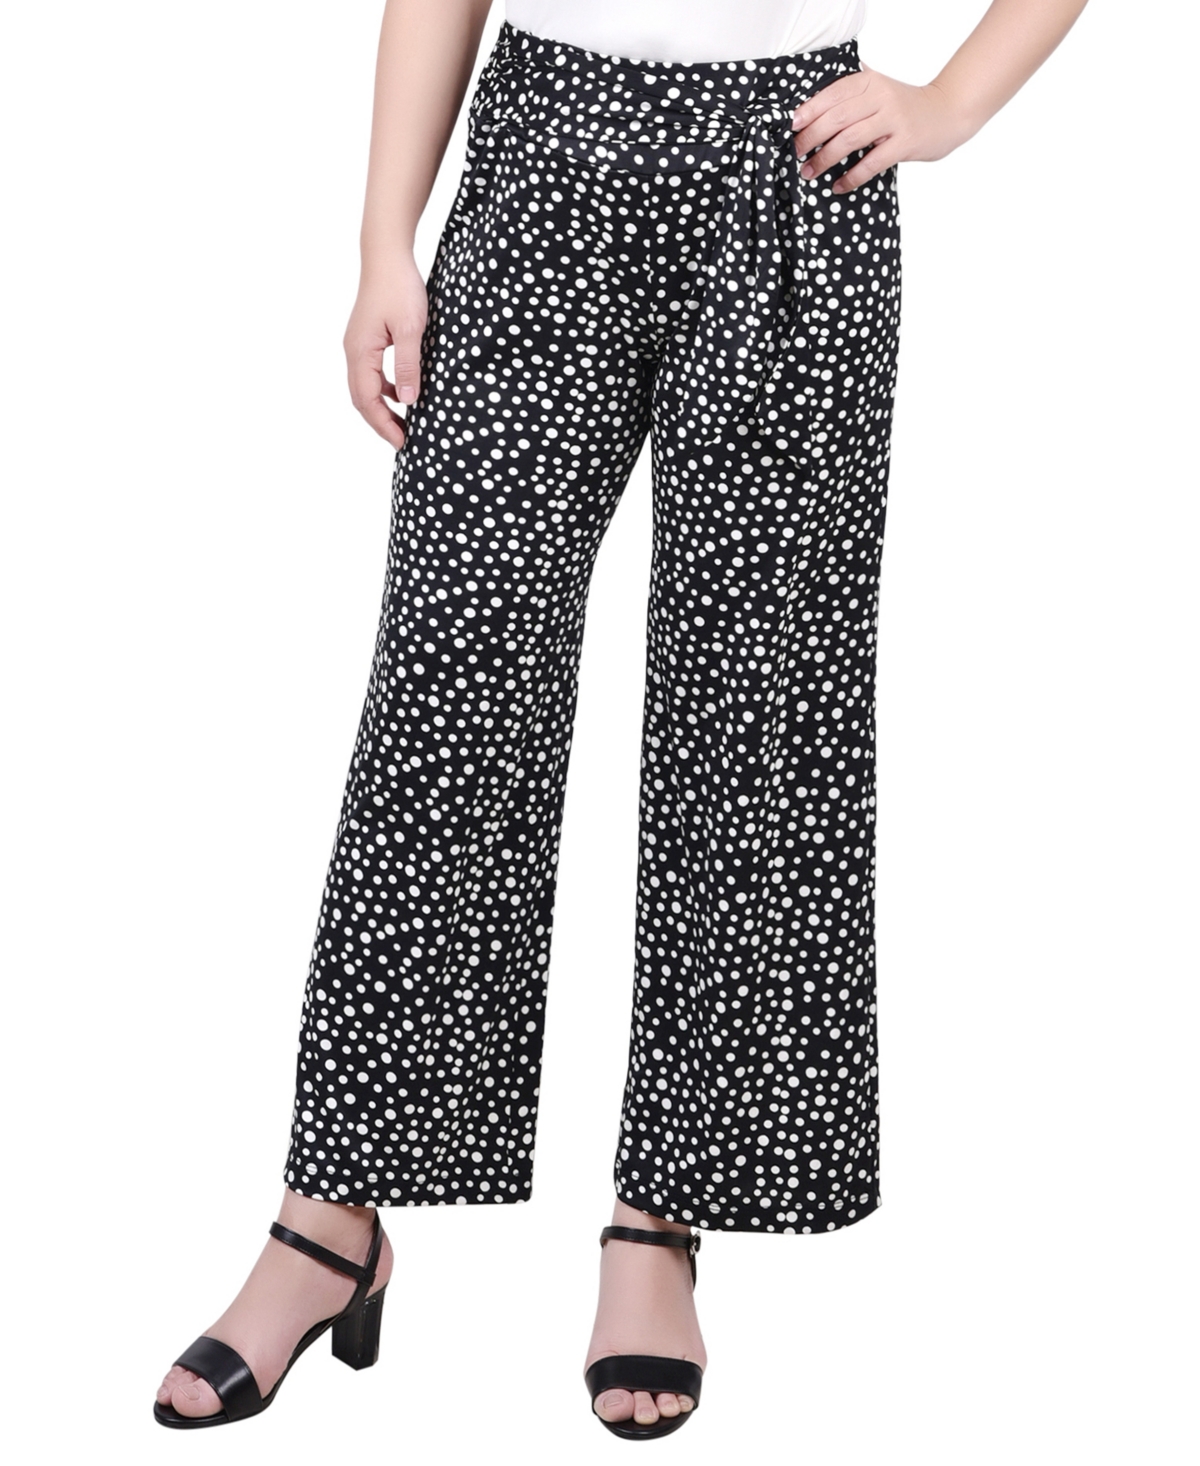 NY COLLECTION WOMEN'S CROPPED PULL ON WITH SASH PANTS